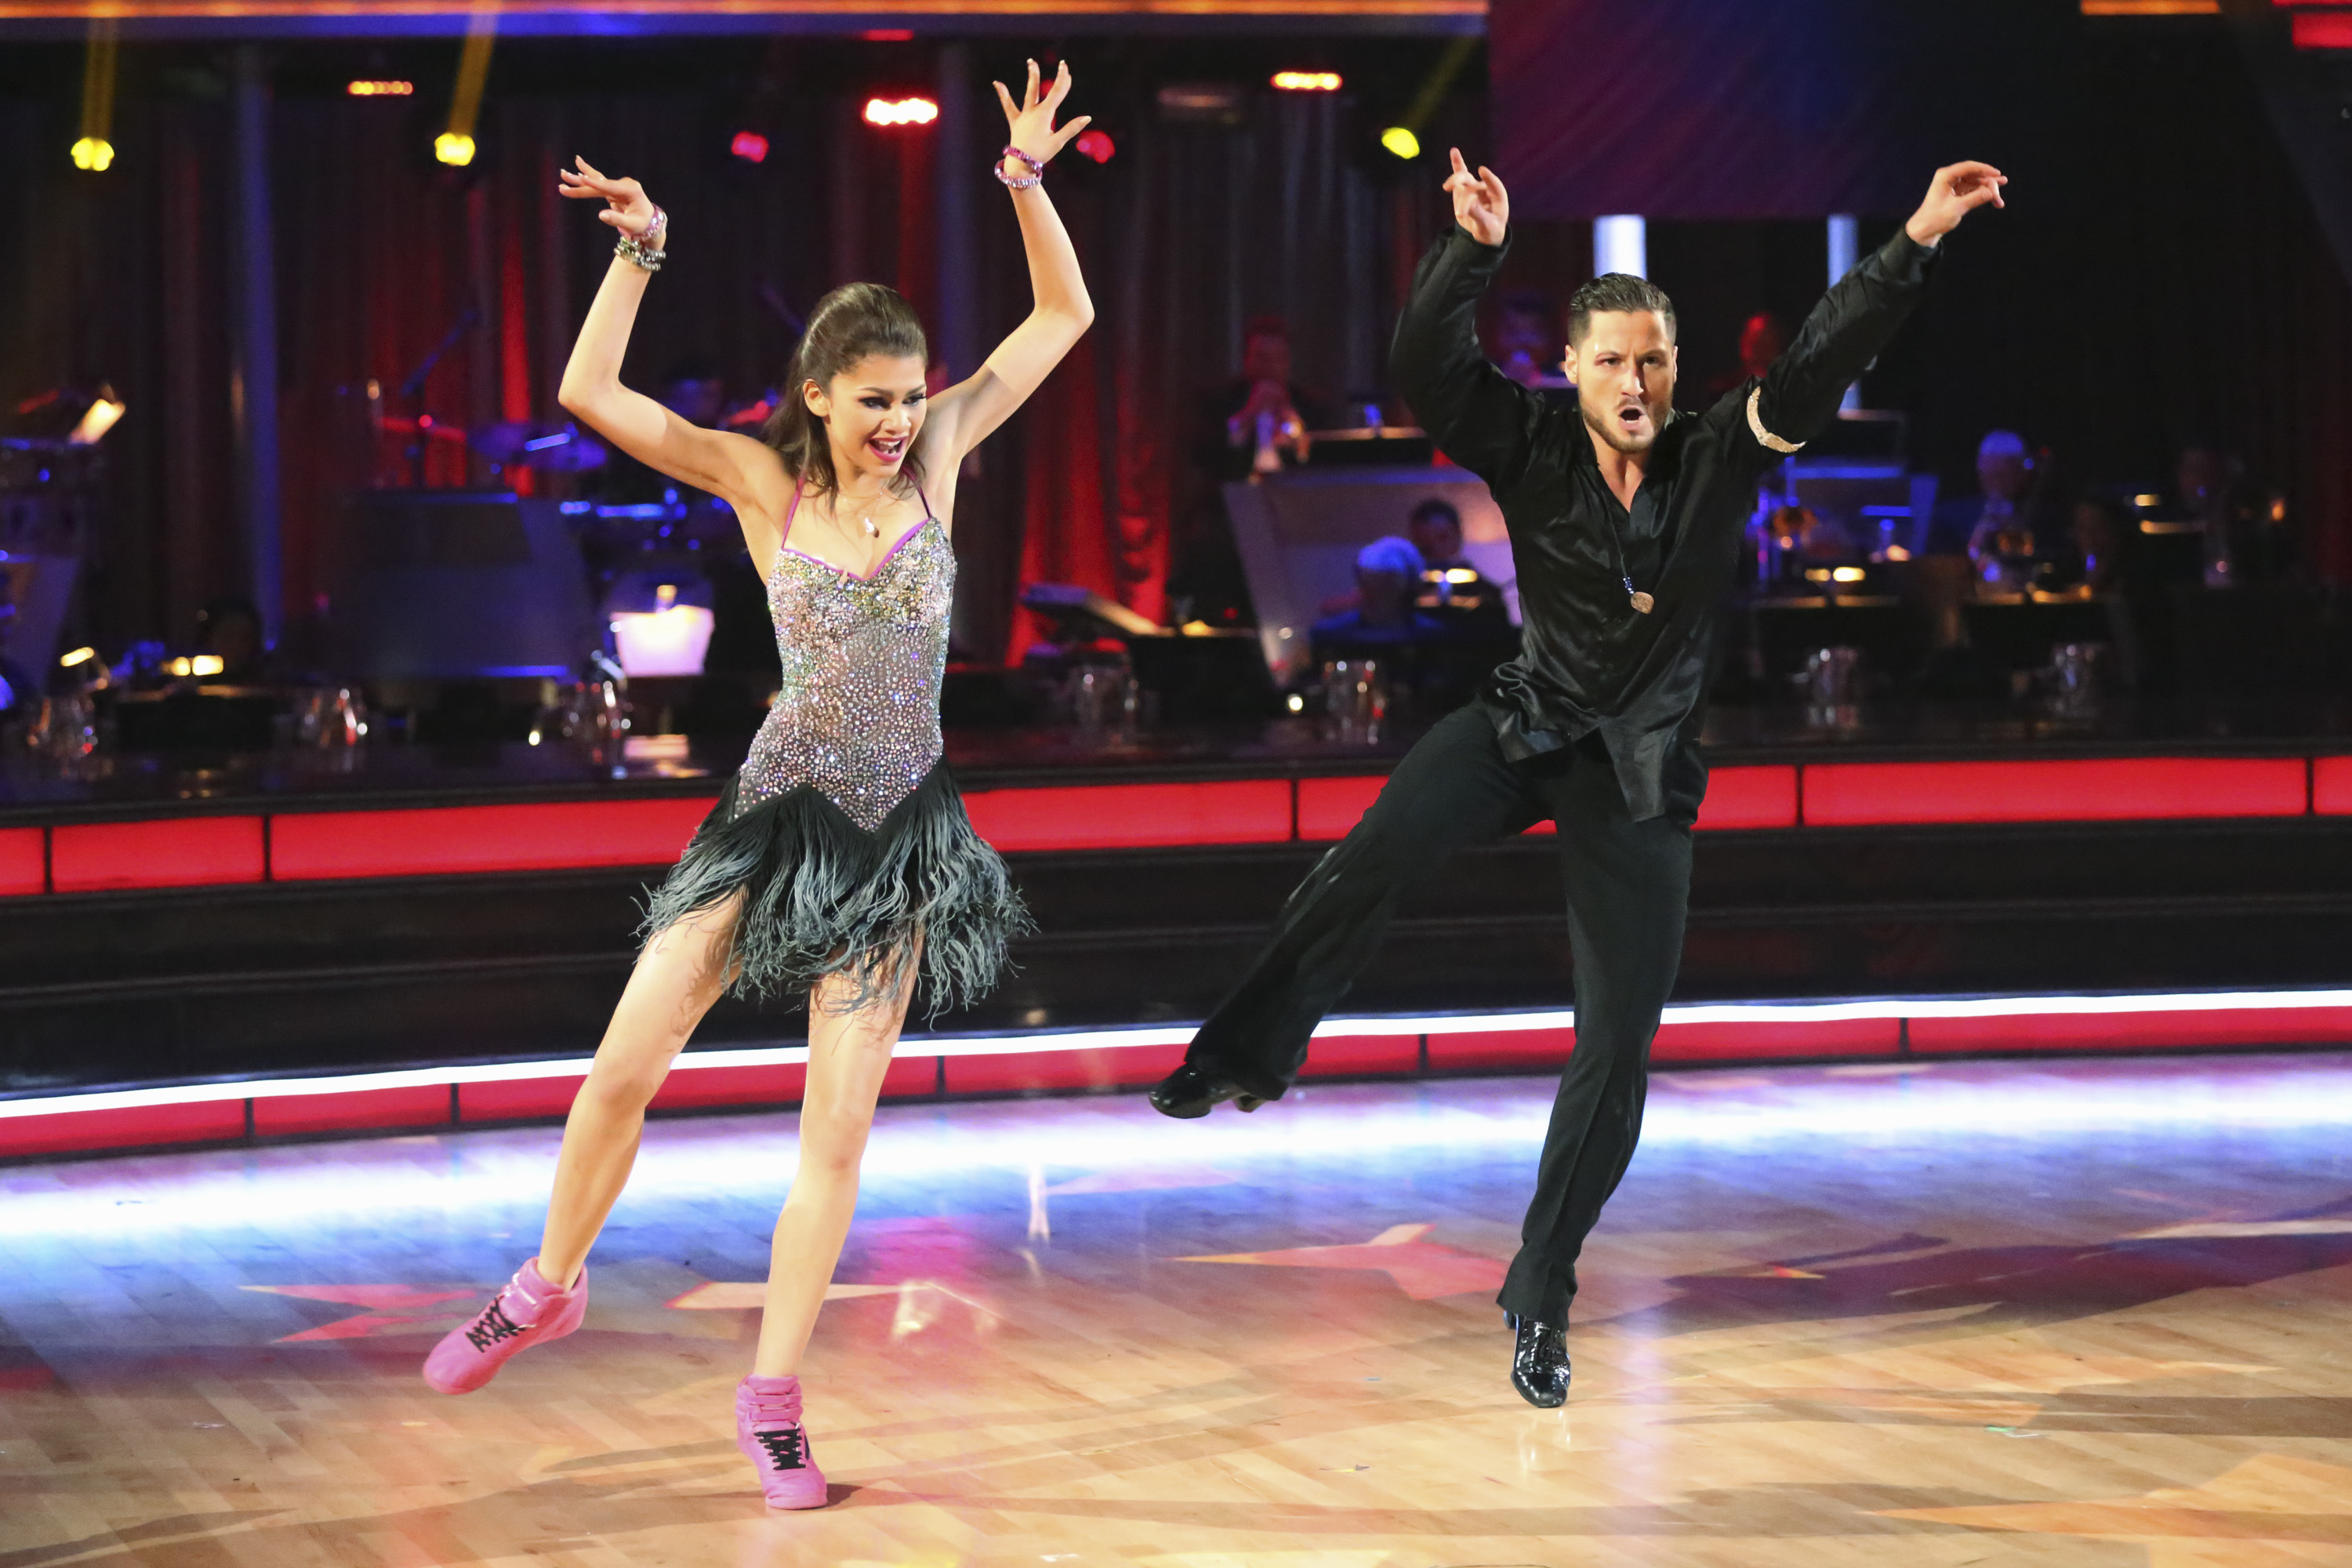 Zendaya and her partner on ABC's 'Dancing With the Stars' 